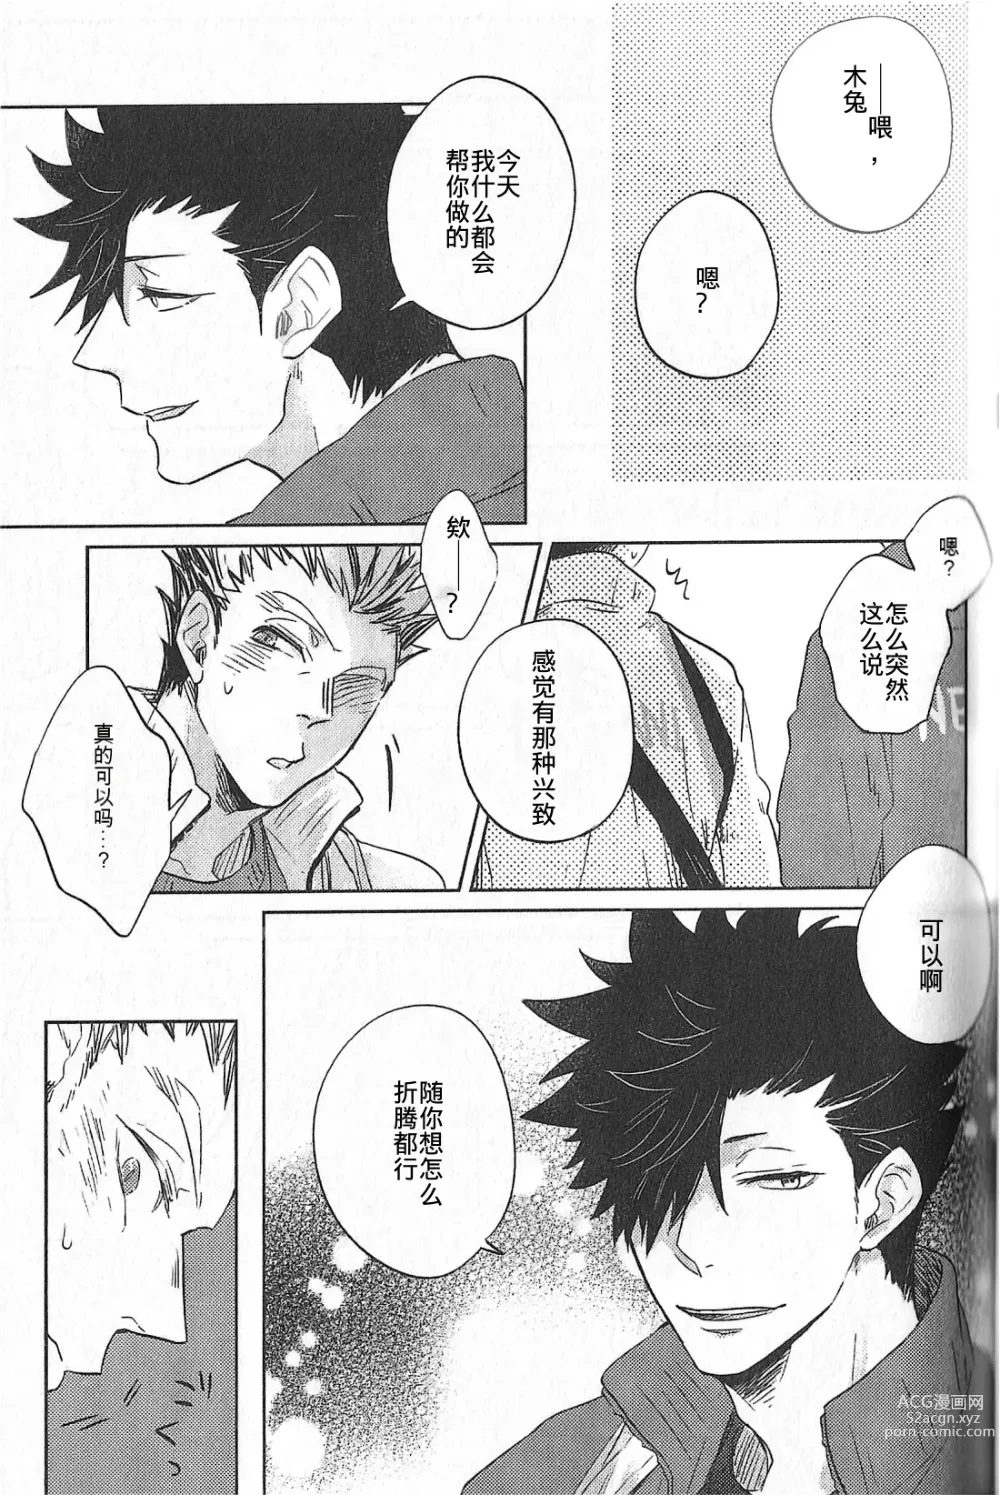 Page 6 of doujinshi 极境的野兽 后篇